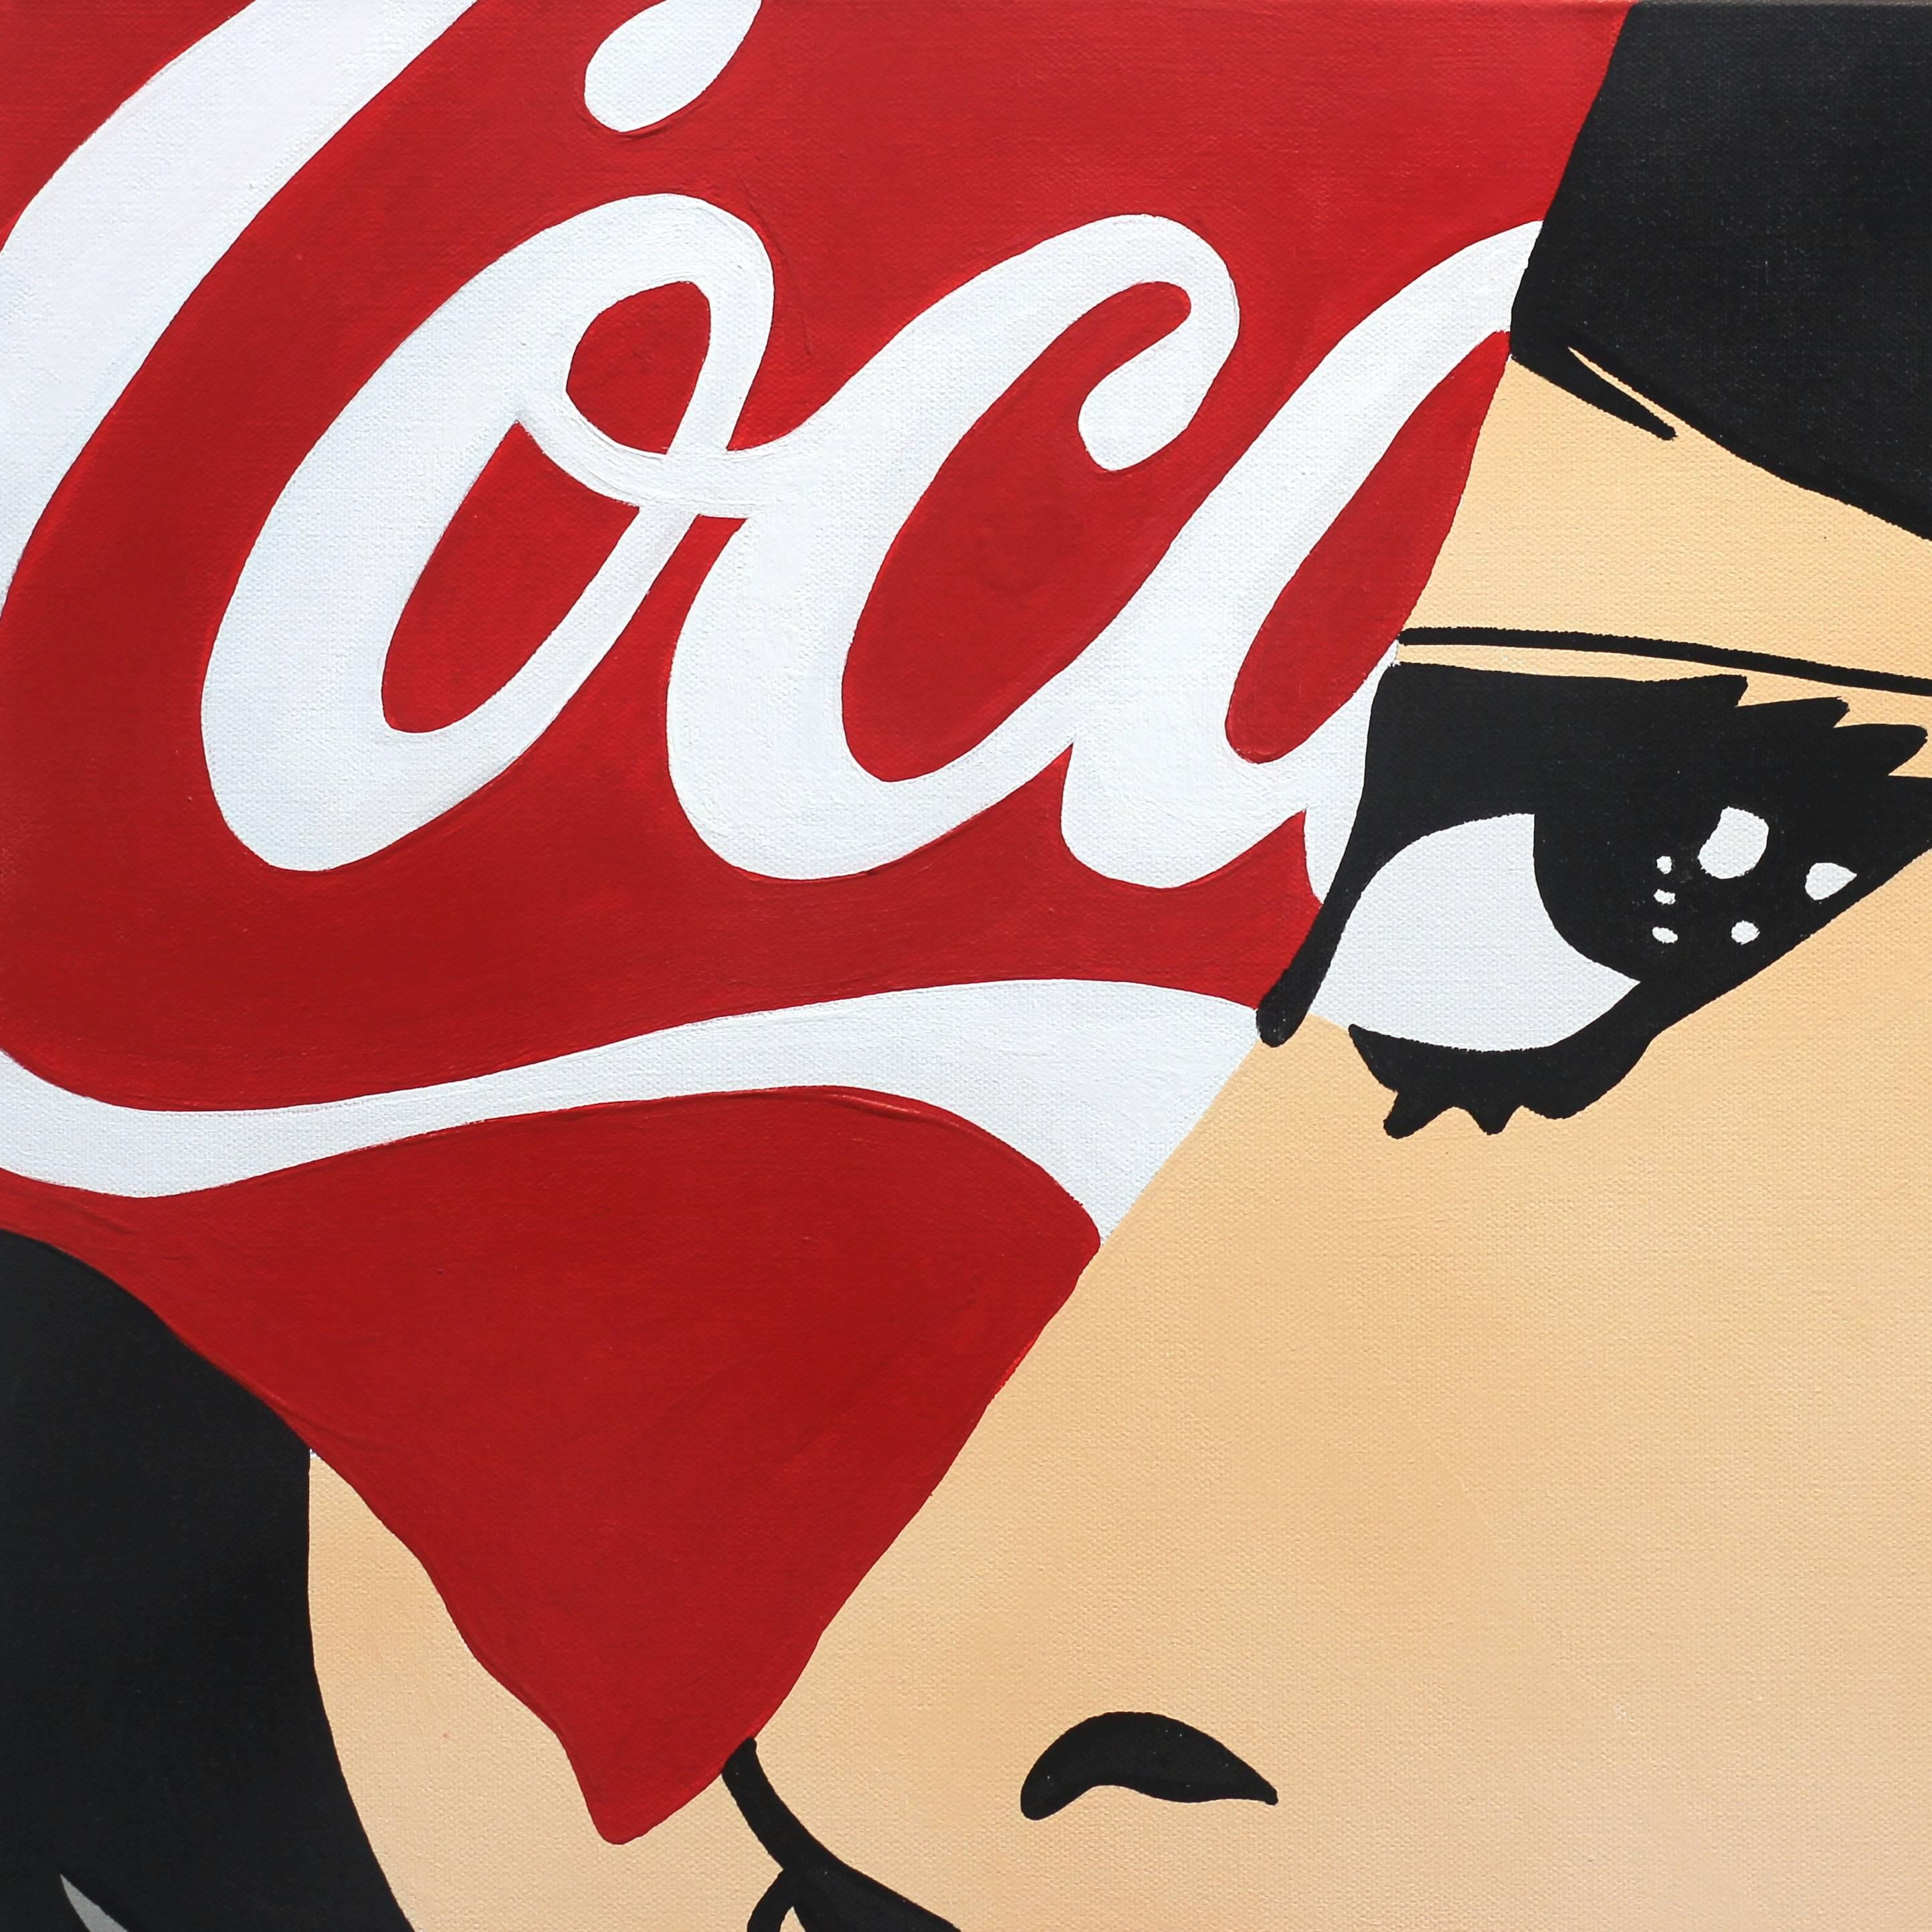 One Call Away - Pop Art Painting by Marlon Diggs